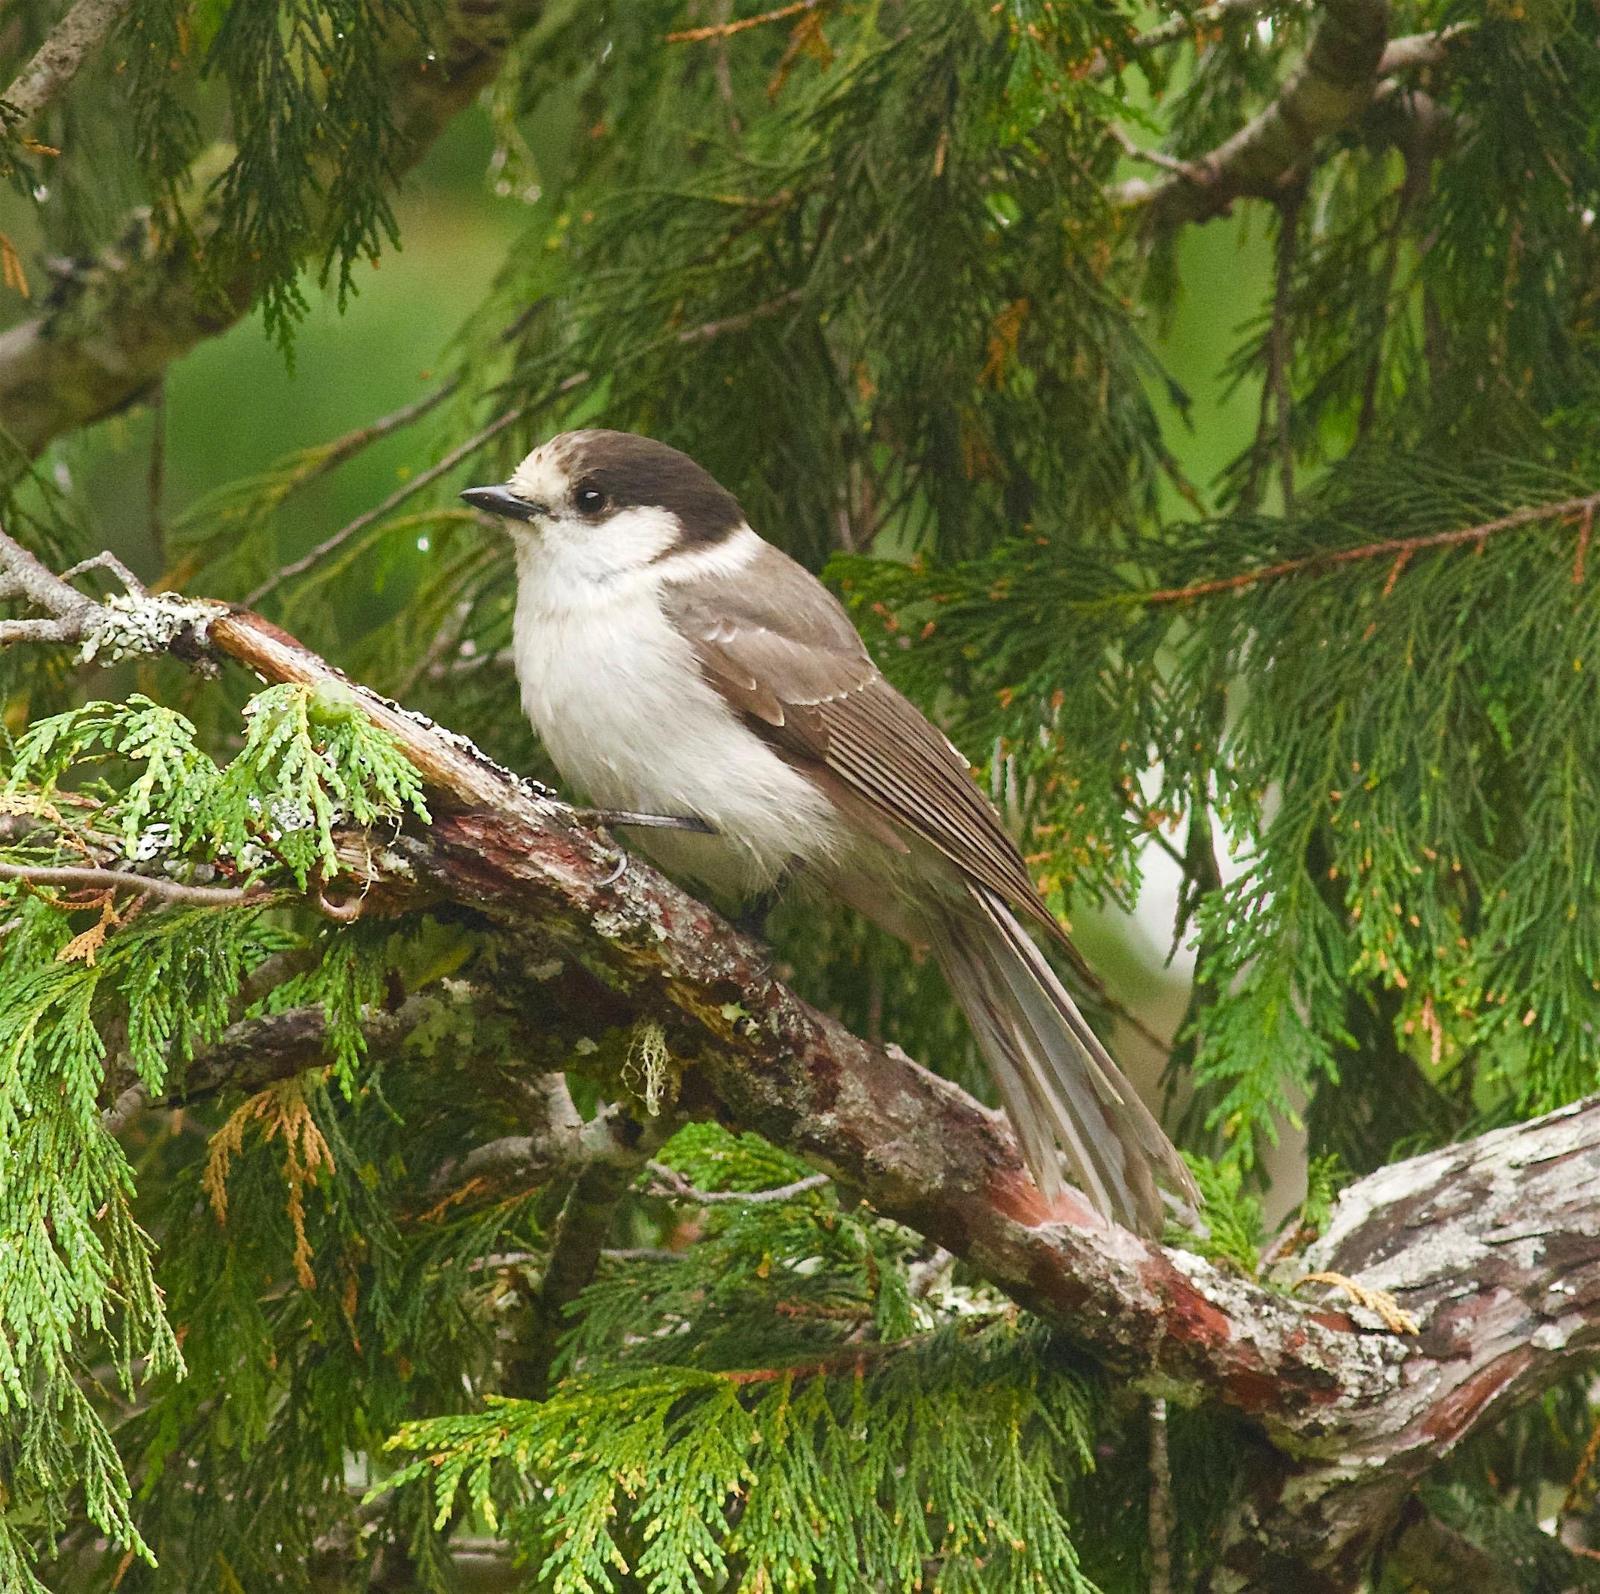 Canada Jay (Pacific) Photo by Kathryn Keith